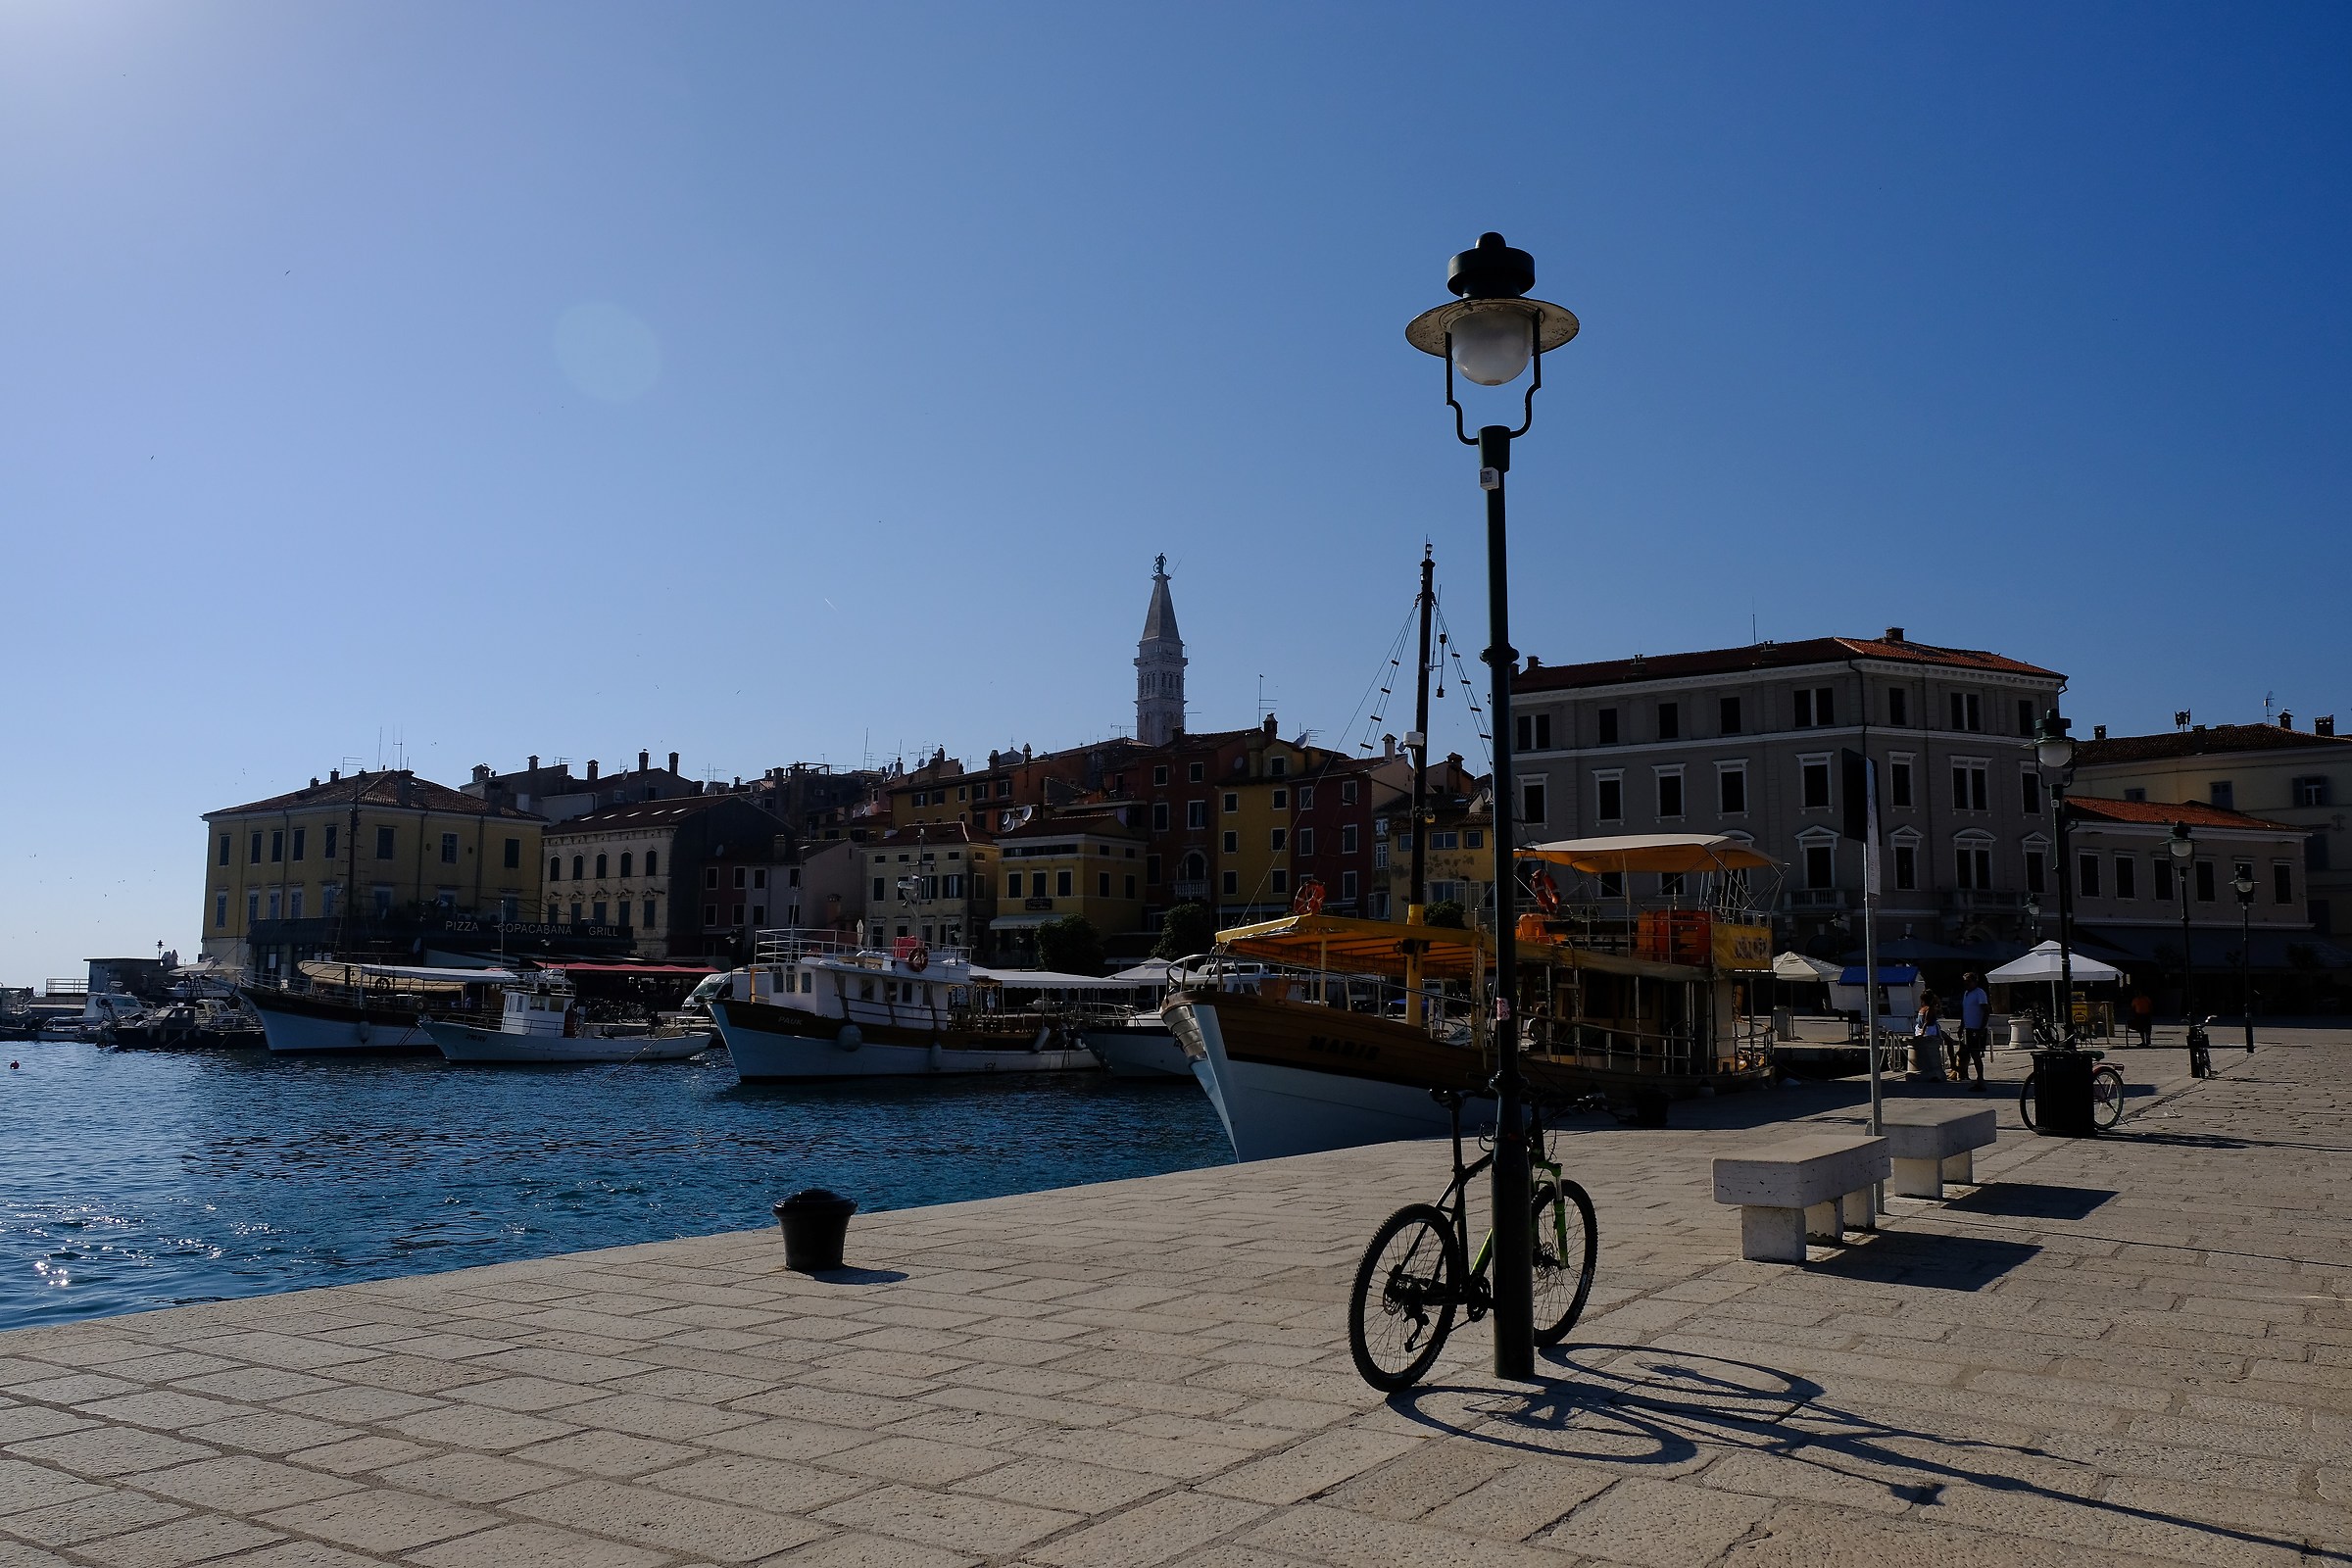 Street lamps and bicycles at the port...